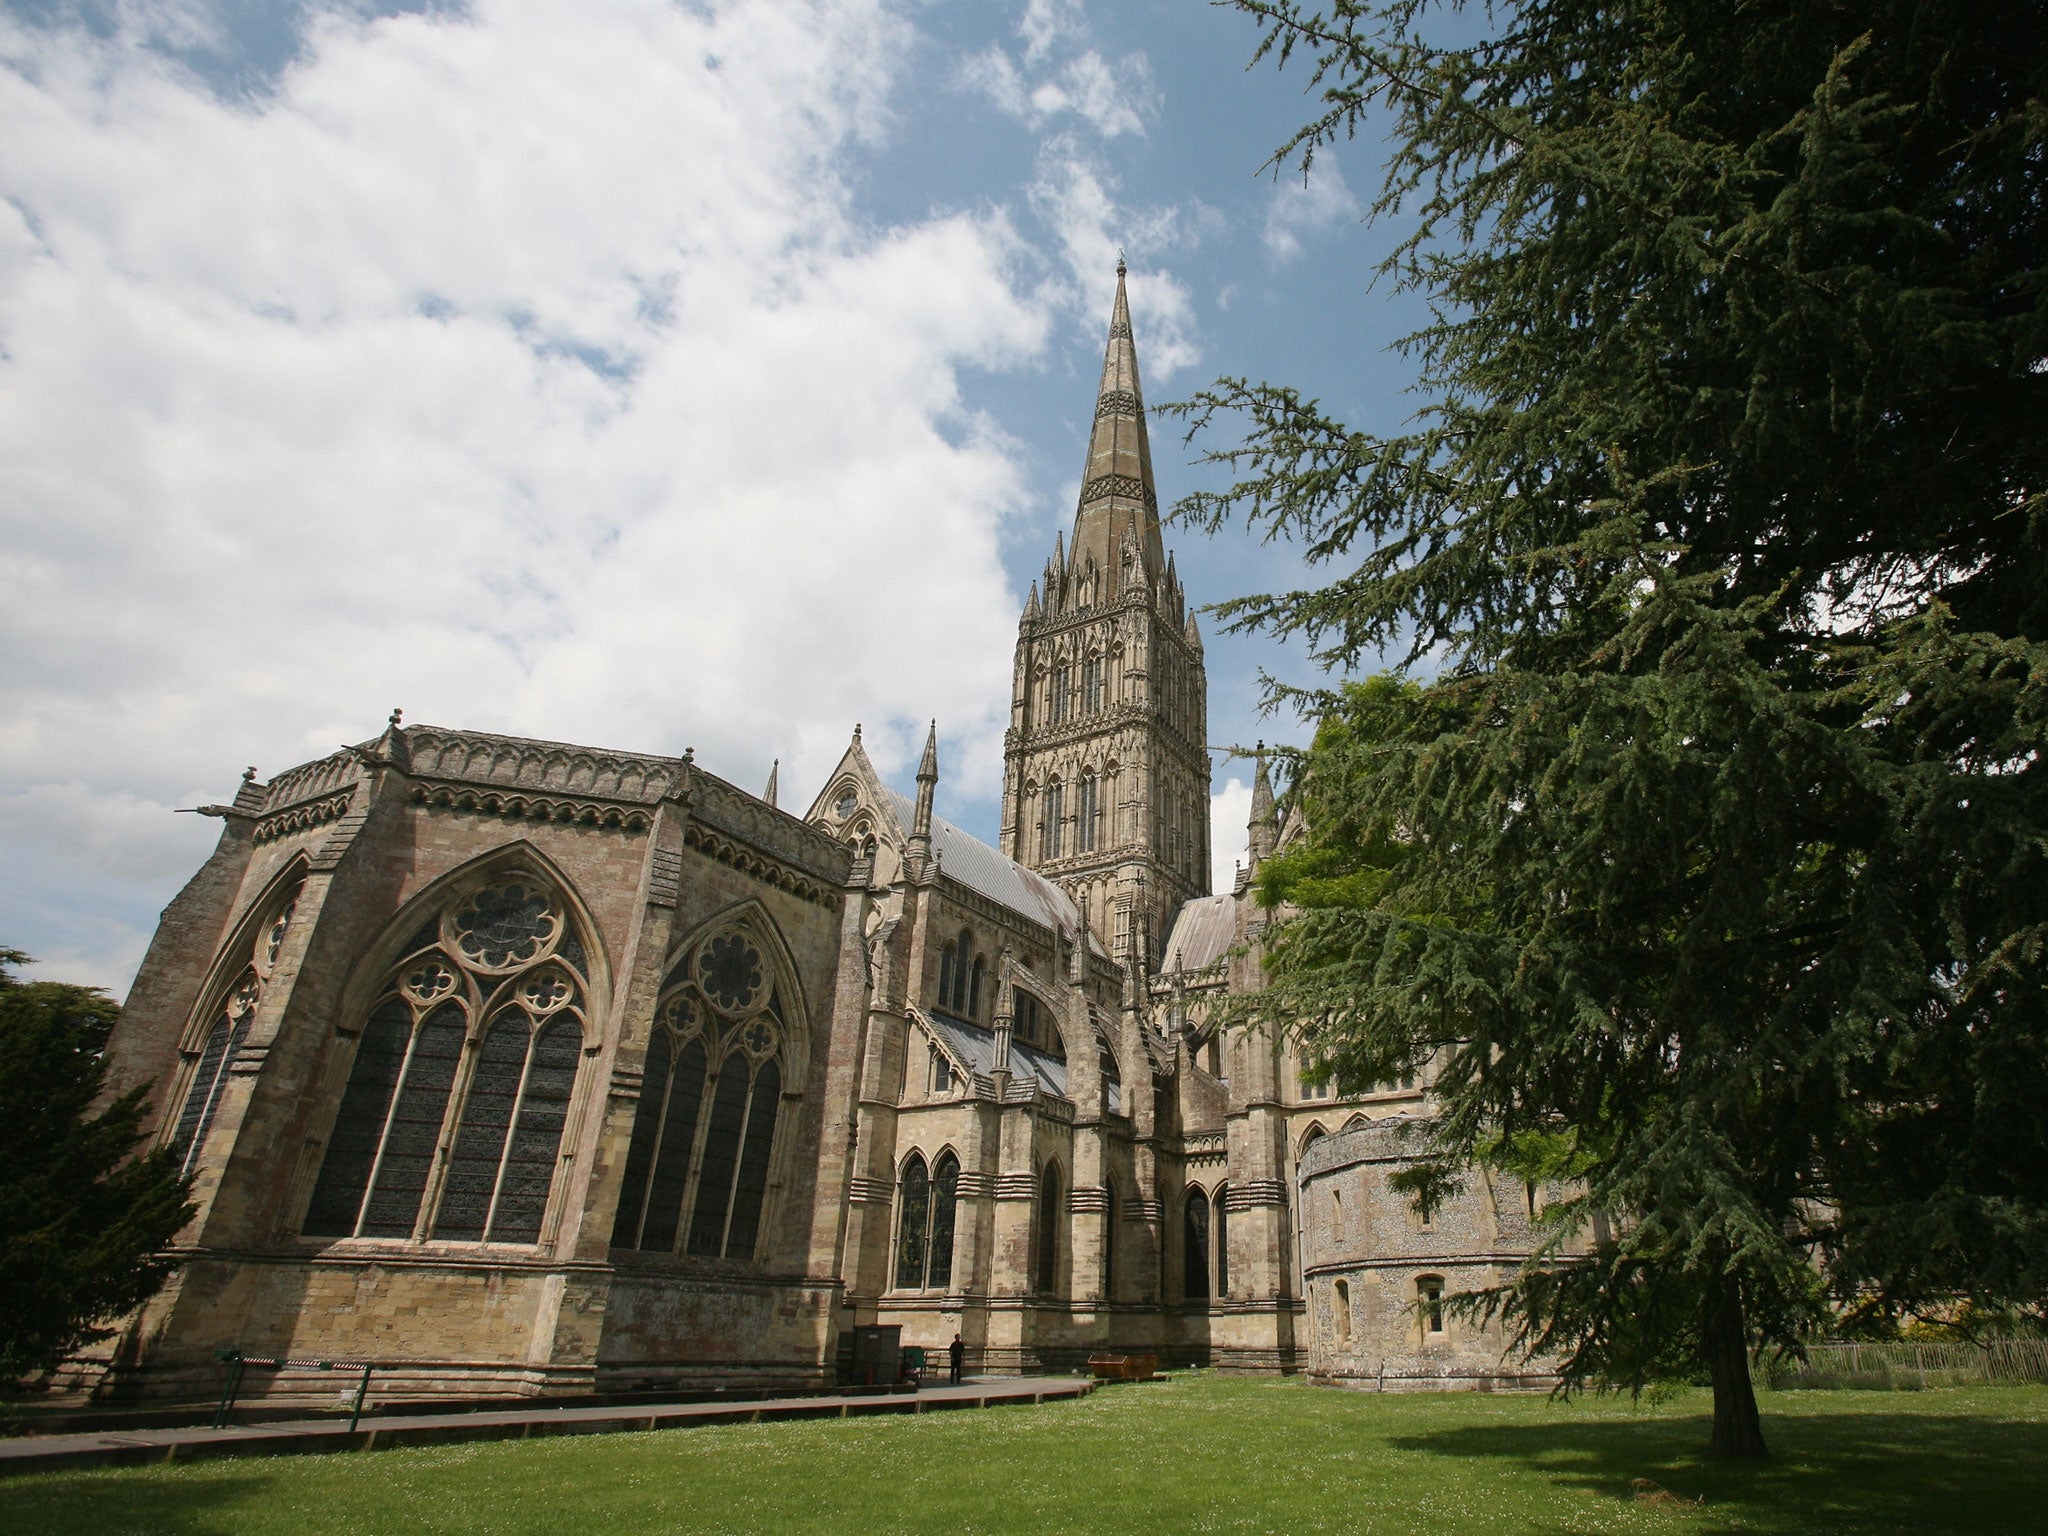 Salisbury Cathedral: Jay-Z visited to view an original copy of the Magna Carta